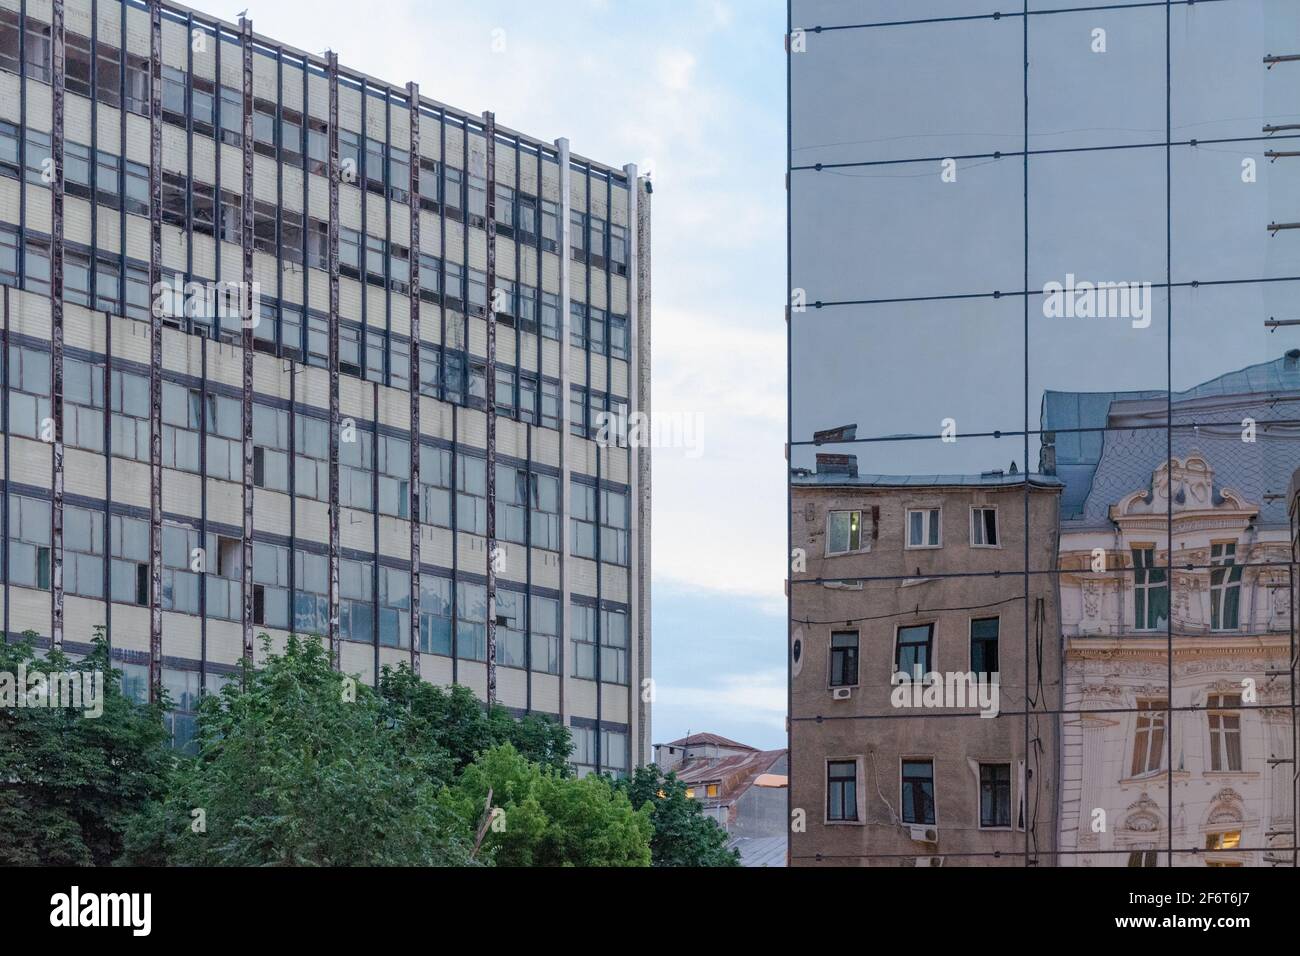 Old classical buildings reflected in the modern glass building, with the socialist modernism building in the background, Bucharest, Romania Stock Photo